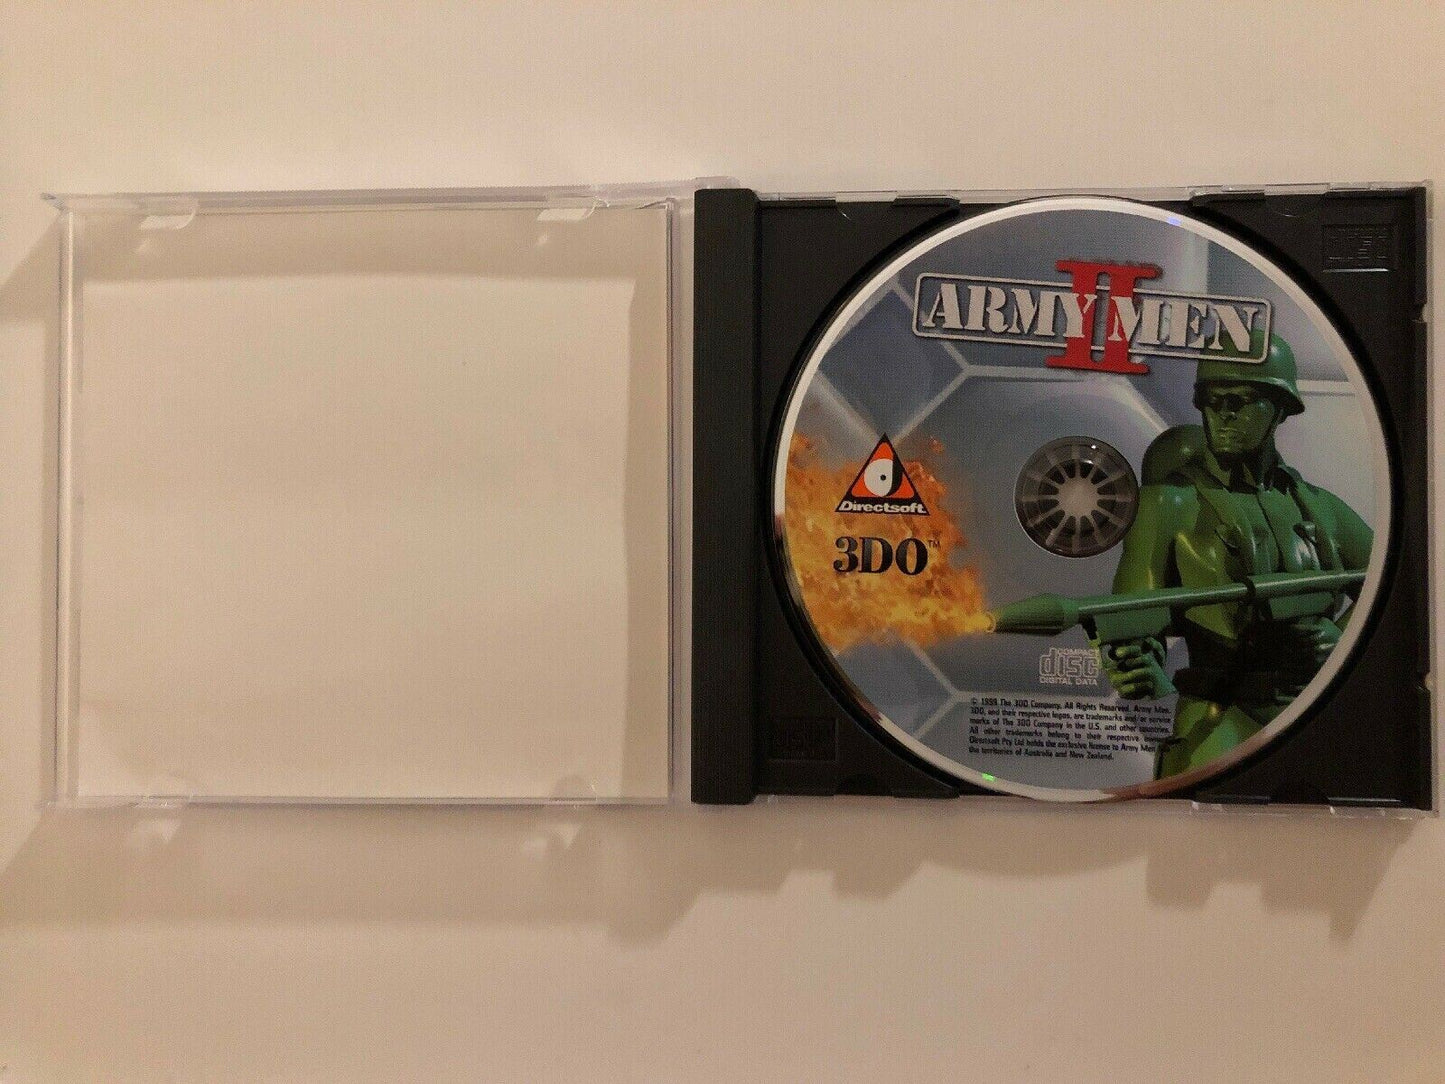 Army Men II 1999 CD-ROM 3DO DirectSoft Arcade Action Vintage Game